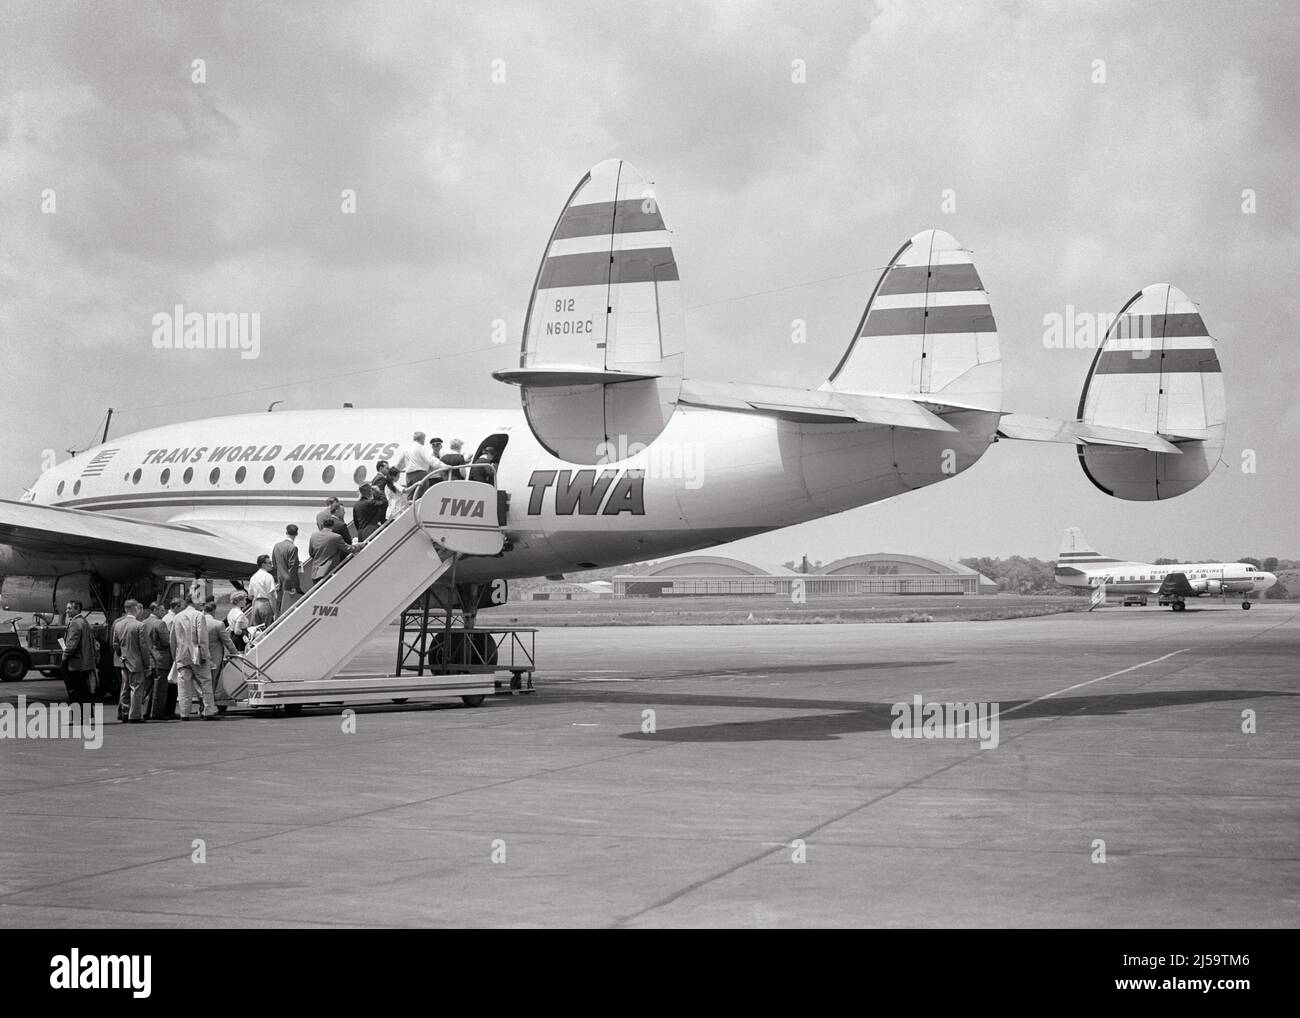 1950s PASSENGERS BOARDING A TWA CONSTELLATION STYLE AIRCRAFT BY STAIRWAY LADDER ENTRY ON THE TARMAC - a74 CRS001 HARS LADIES PERSONS MALES TRANSPORTATION B&W FREEDOM WIDE ANGLE ADVENTURE AIRPLANES CUSTOMER SERVICE EXTERIOR LOW ANGLE POWERFUL PROGRESS INNOVATION PRIDE TARMAC AVIATION STAIRWAY 1943 CONCEPTUAL CONSTELLATION STYLISH TWA ENTRY LOCKHEED TRANS WORLD AIRLINES AIRLINER BLACK AND WHITE OLD FASHIONED SLEEK Stock Photo